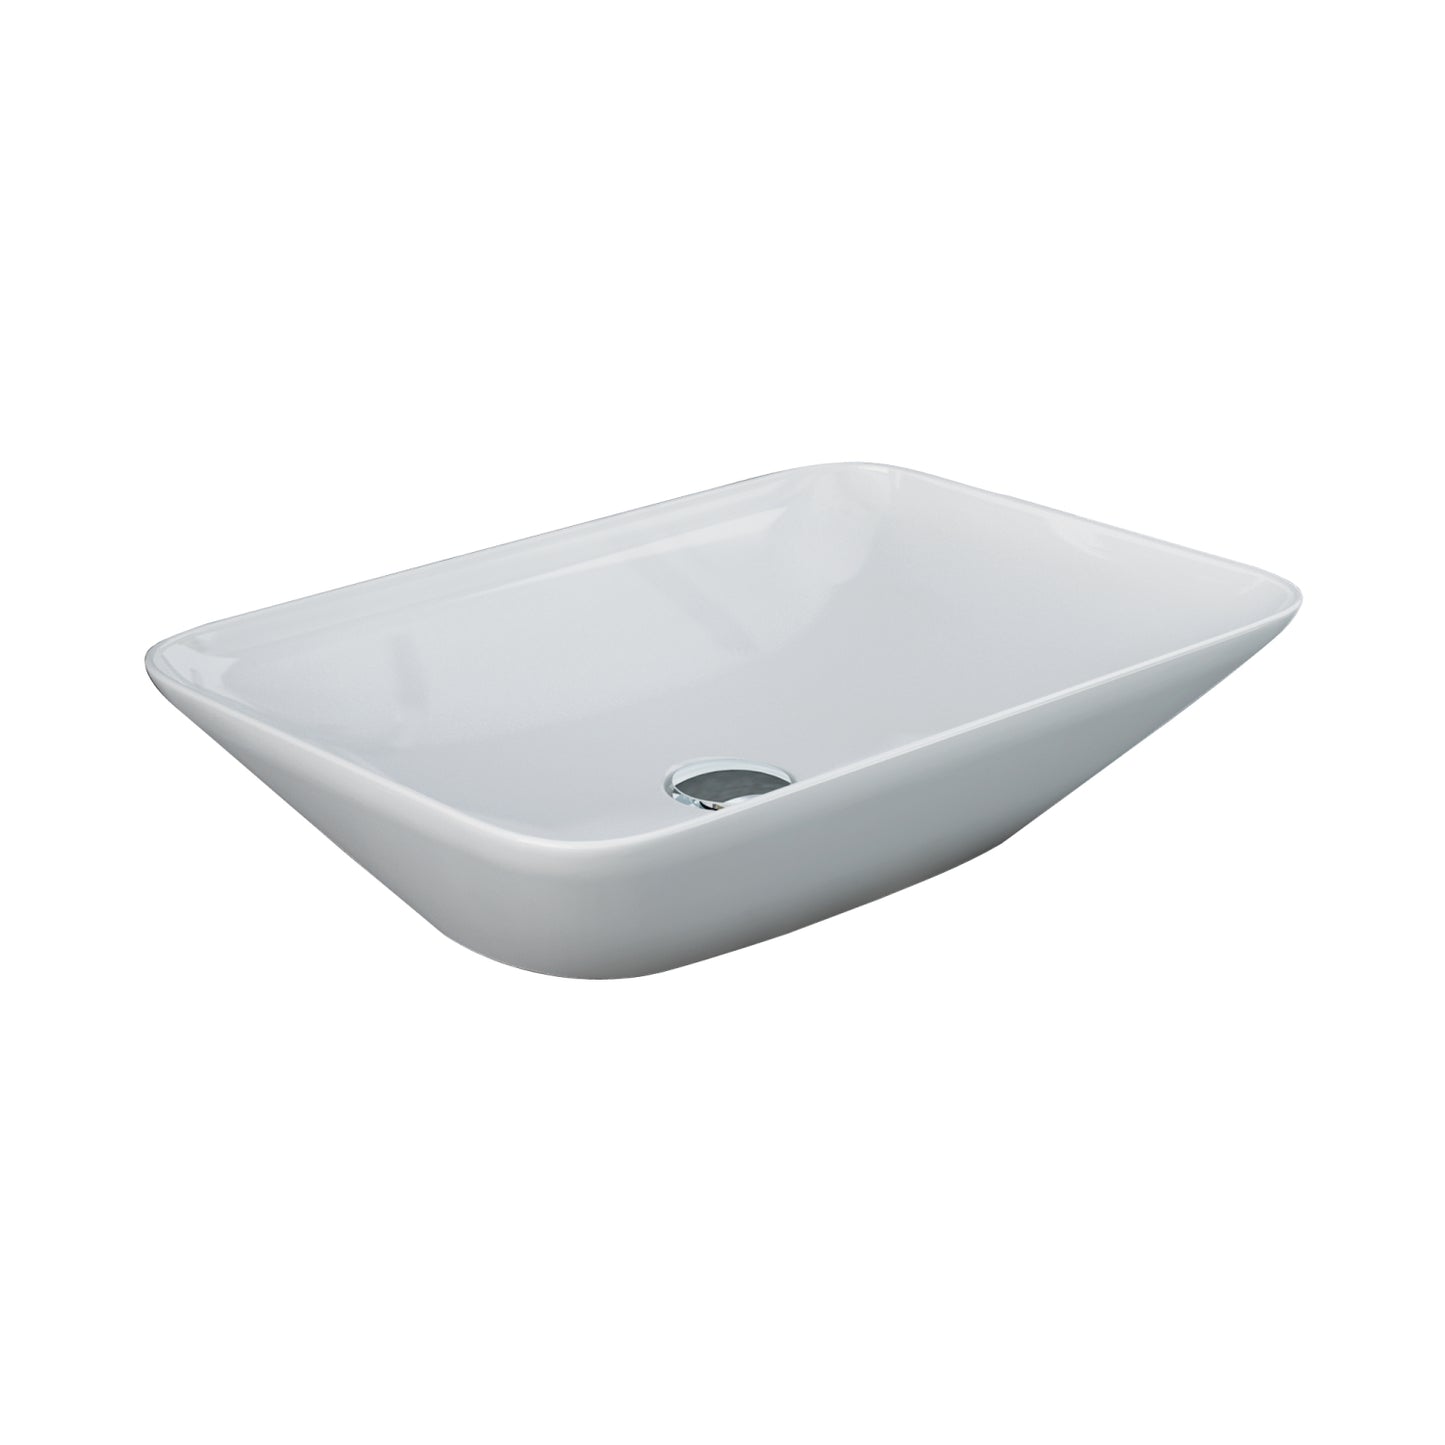 Variant 21 5/8" x 14" Rectangle Vessel Basin Sink in White